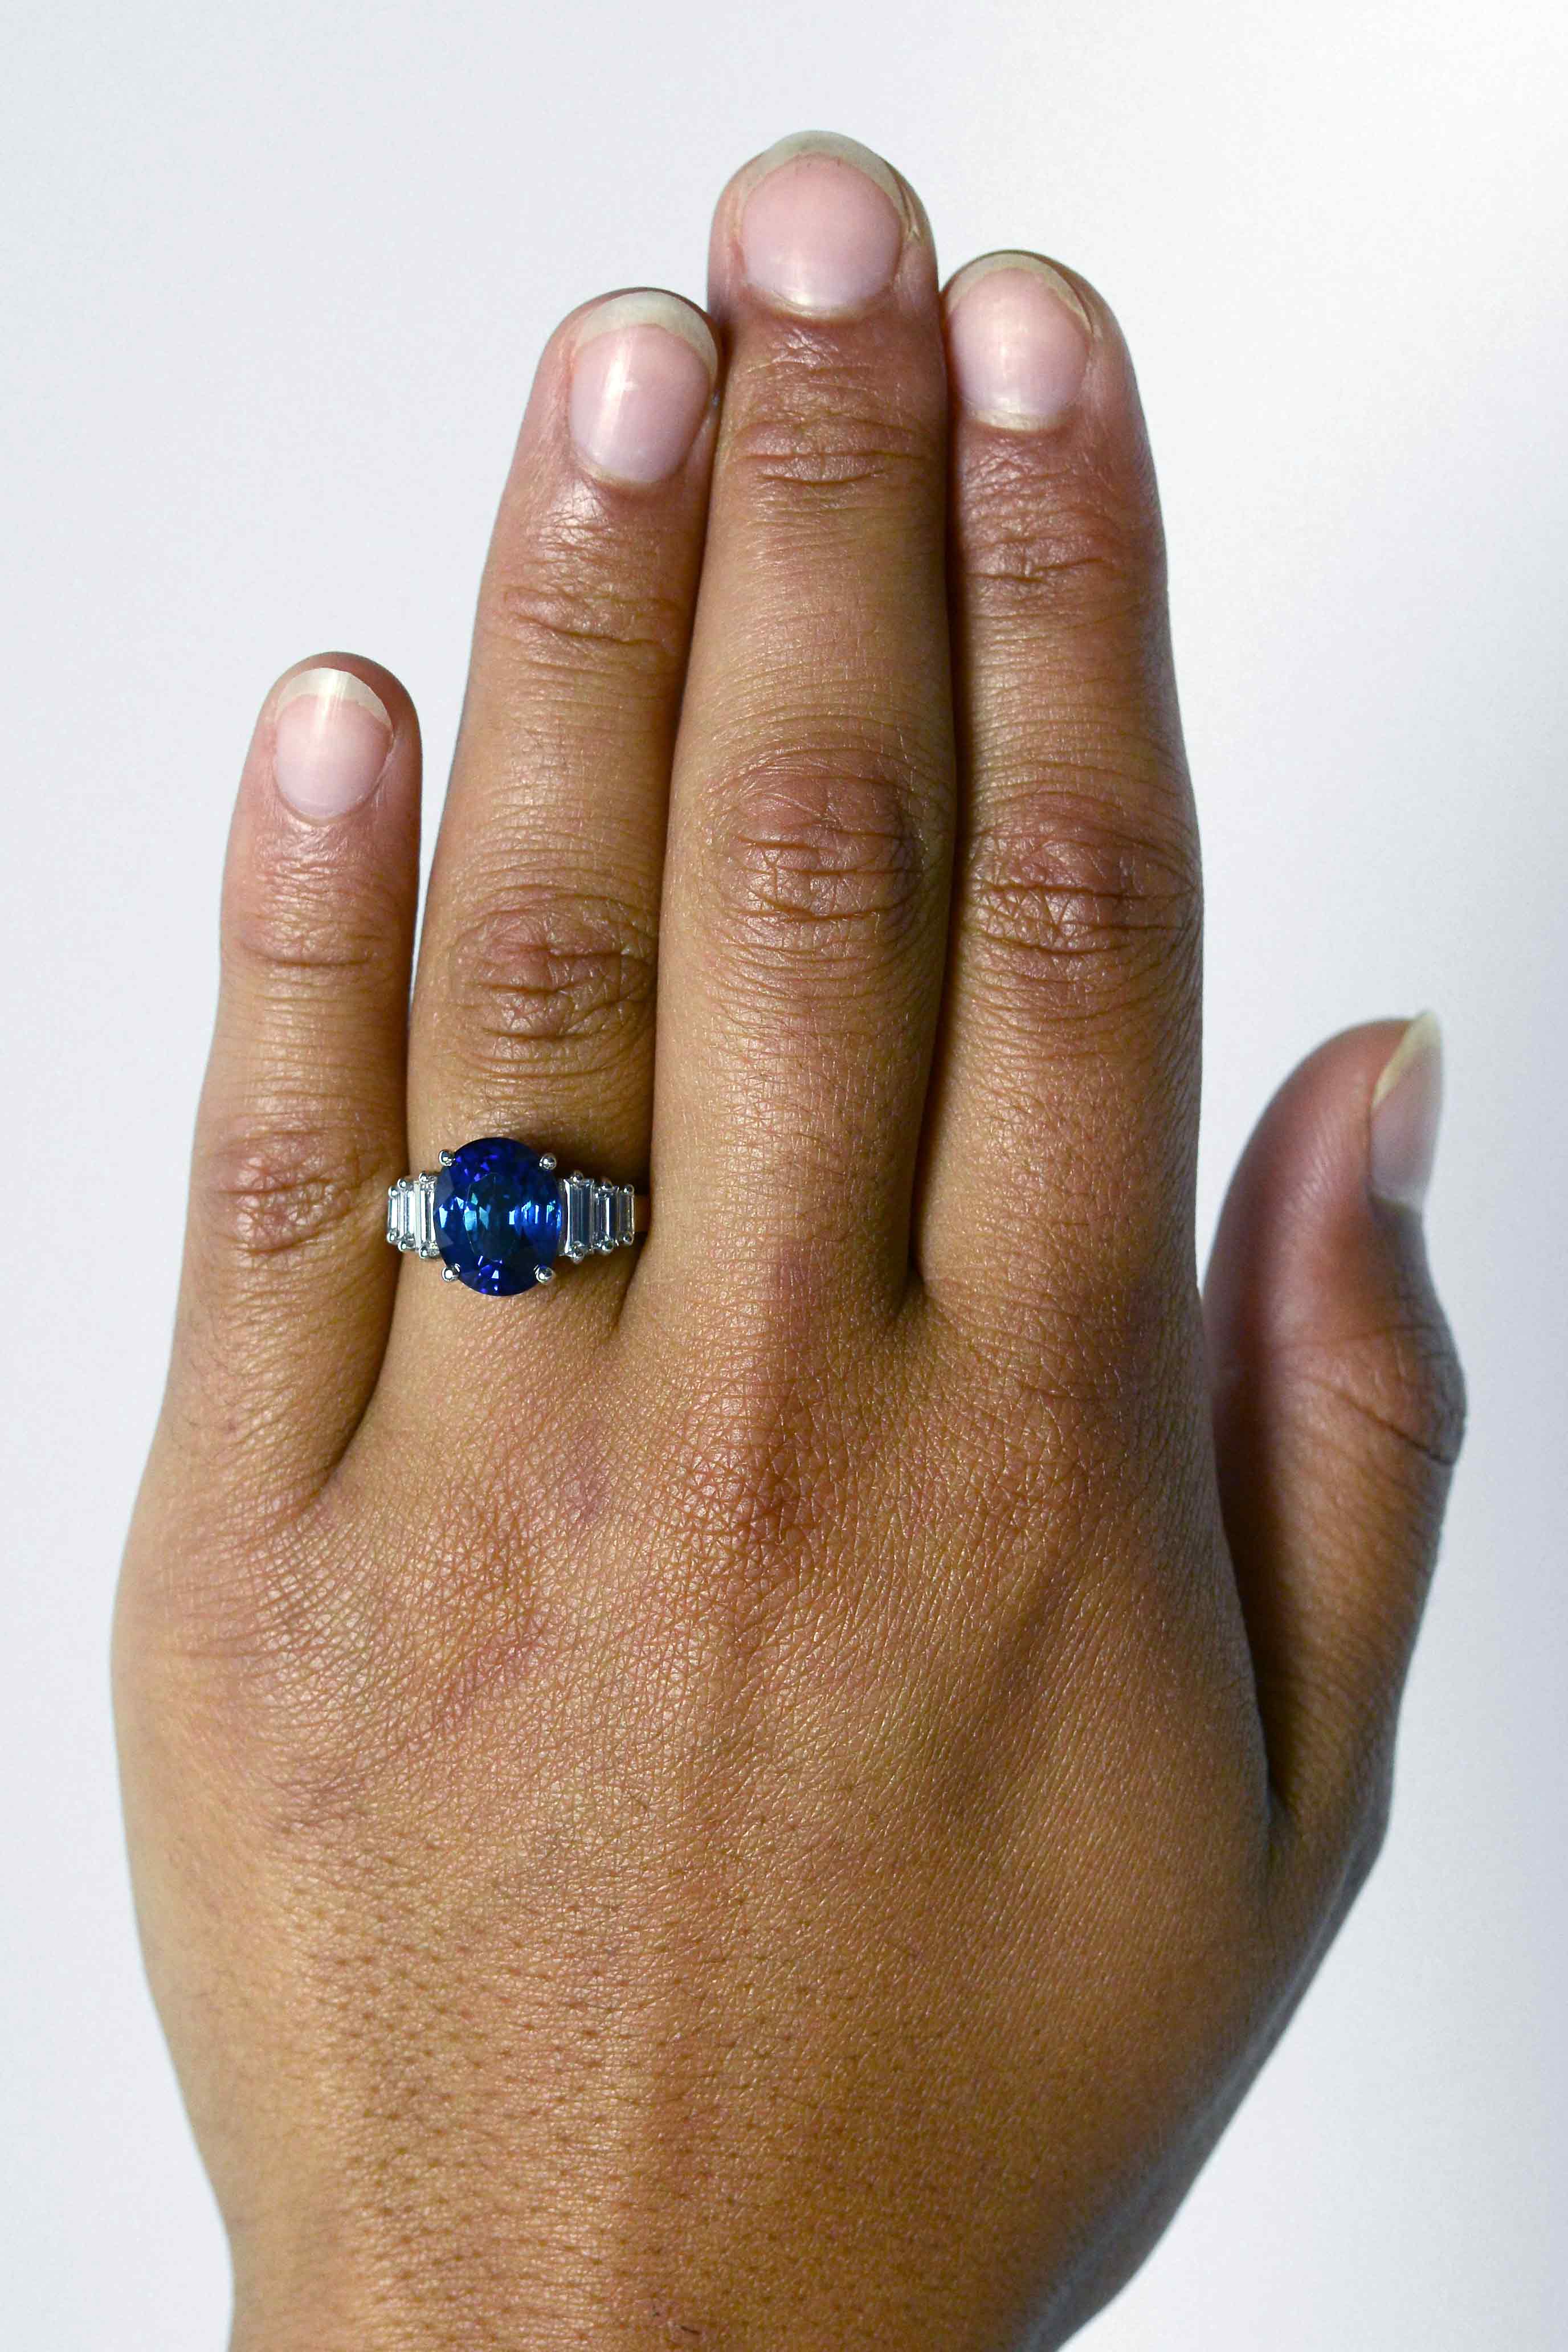 This size 7 Art Deco revival wedding ring has a 4 carat blue sapphire.